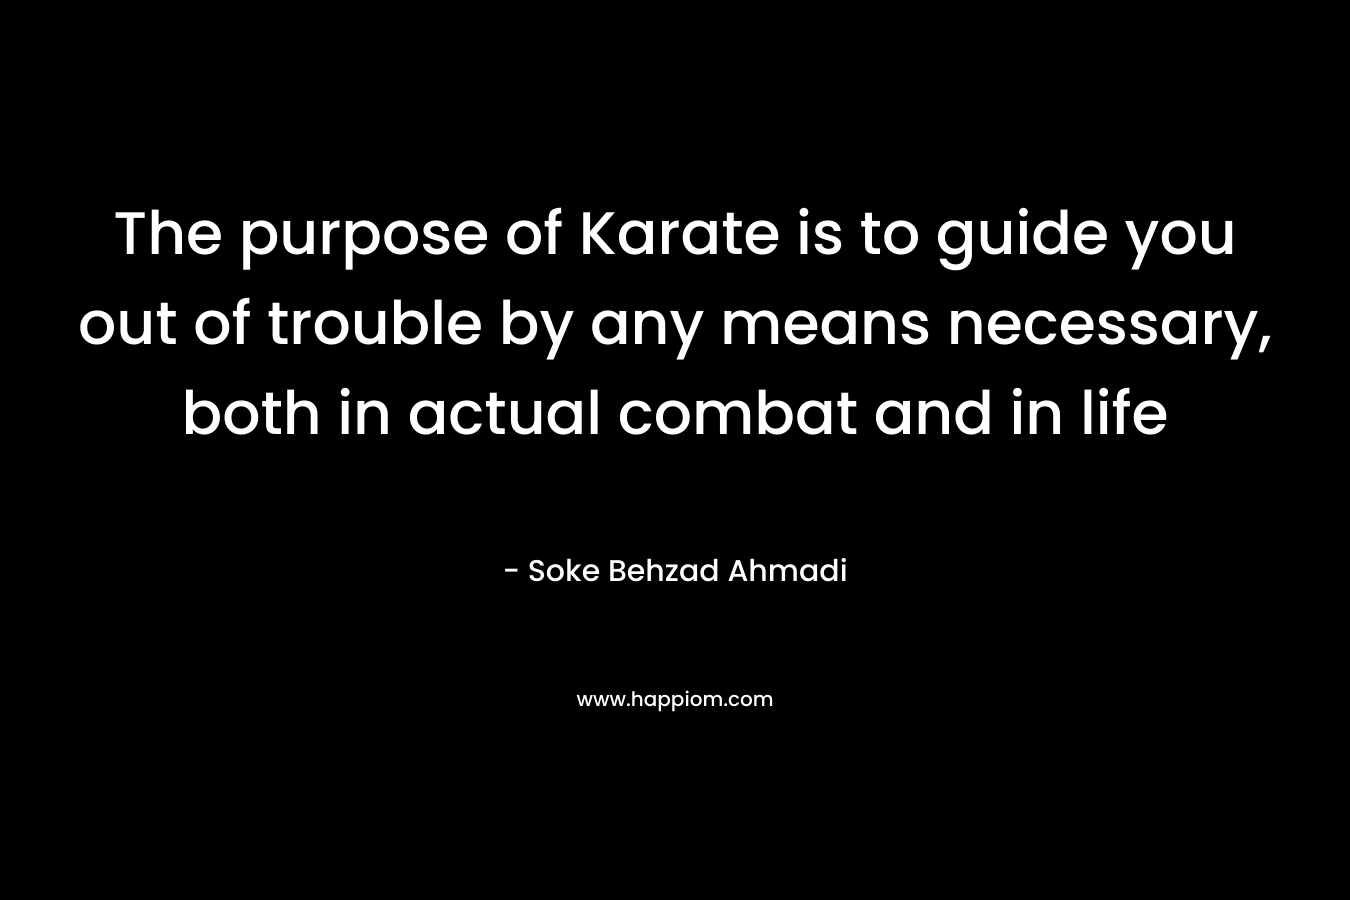 The purpose of Karate is to guide you out of trouble by any means necessary, both in actual combat and in life – Soke Behzad Ahmadi